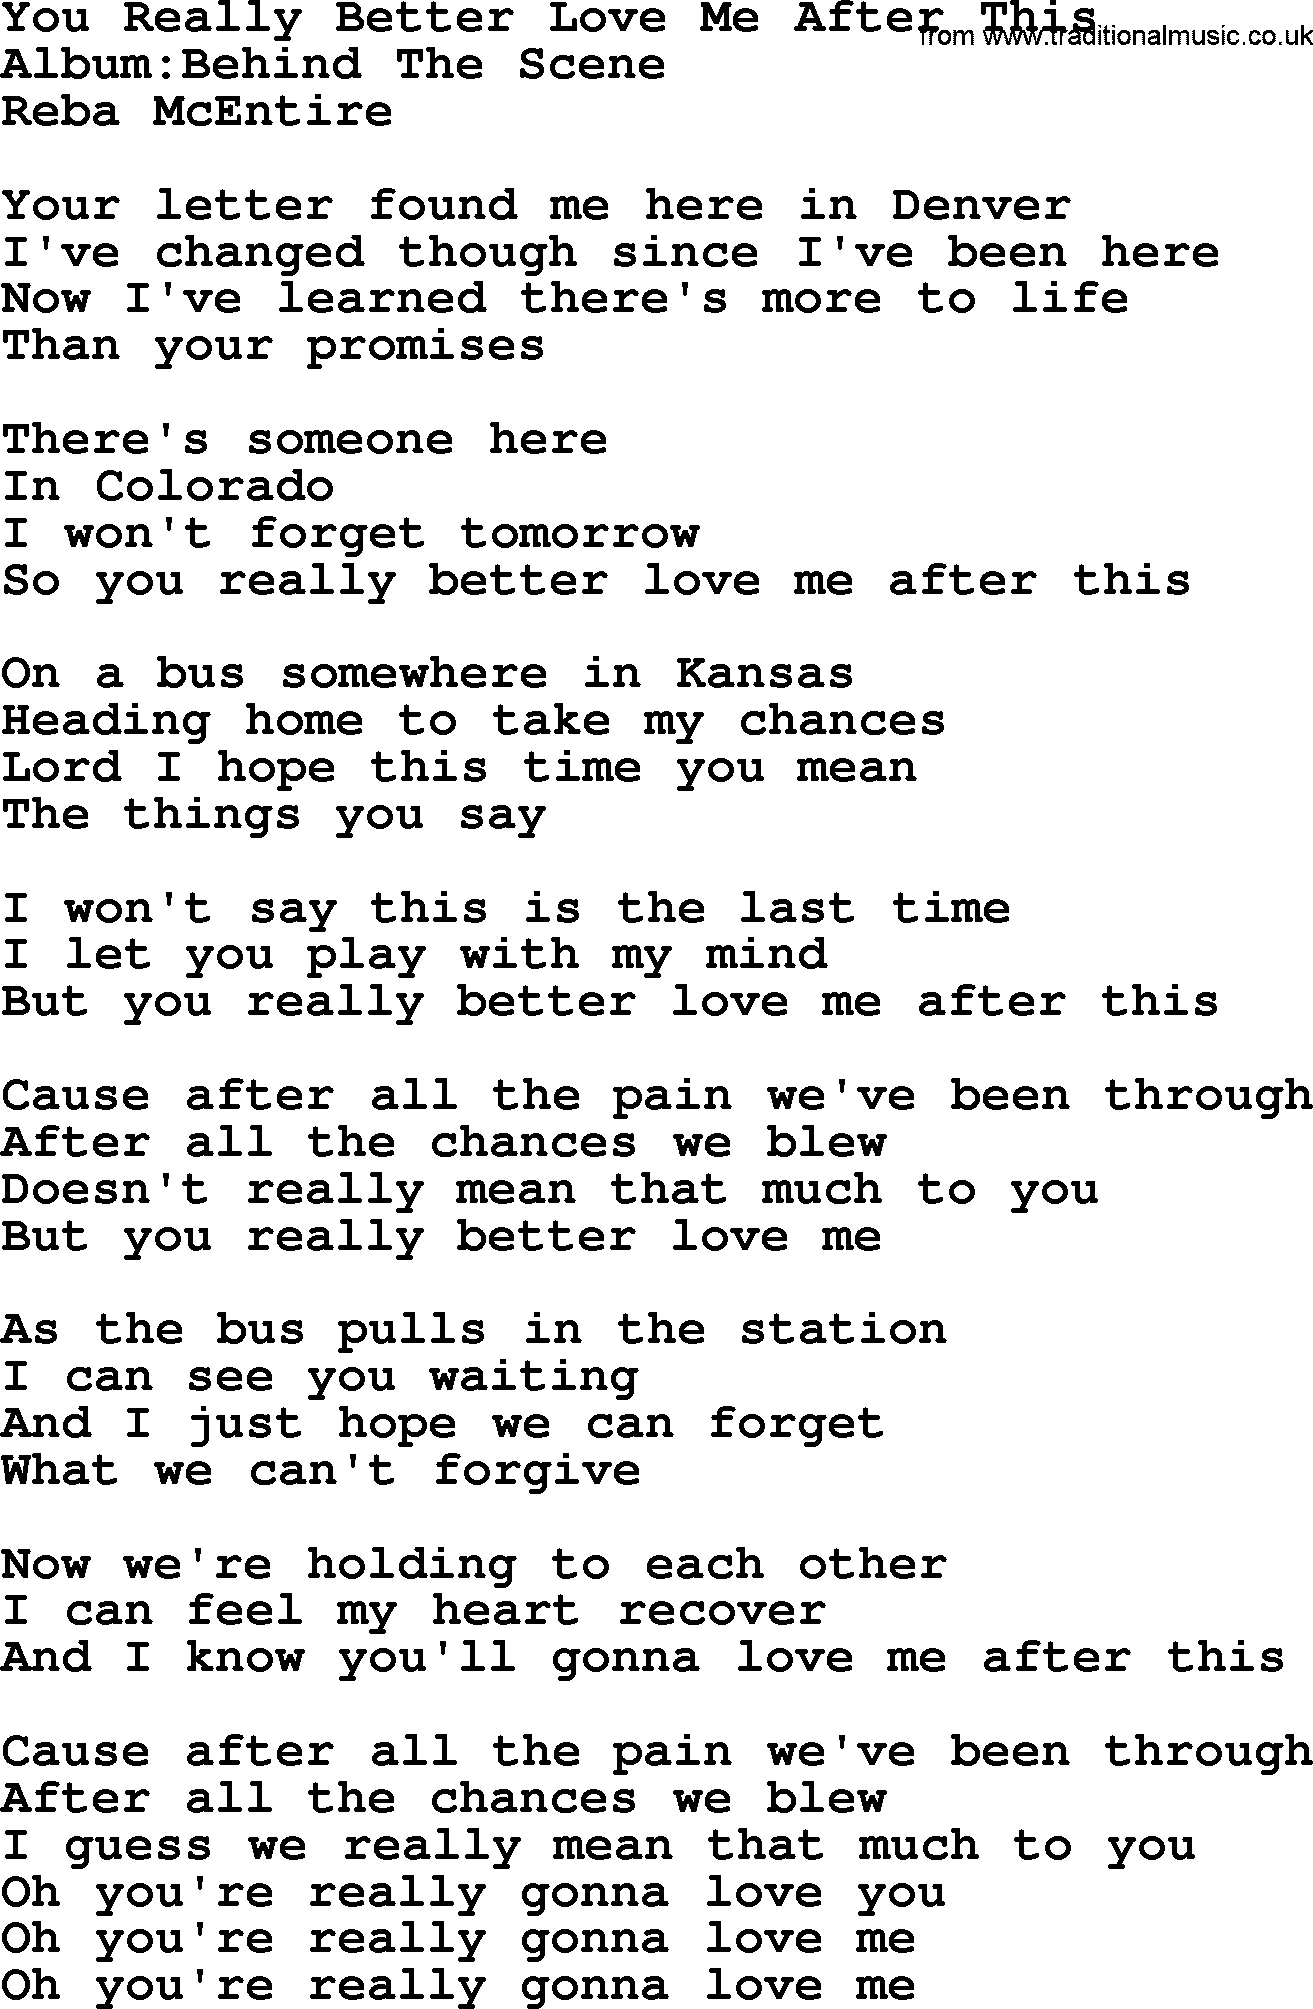 Reba McEntire song: You Really Better Love Me After This lyrics